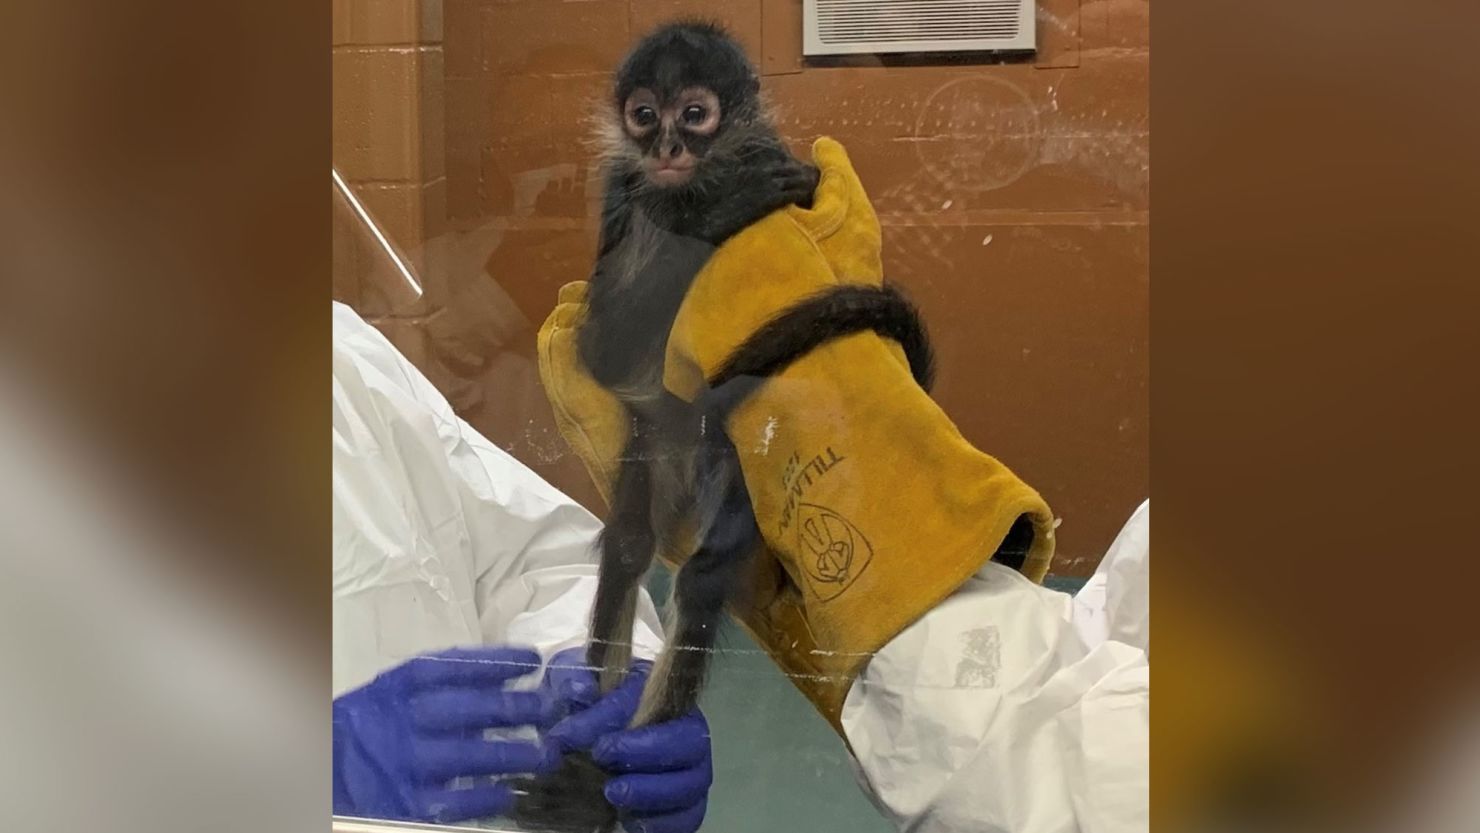 A Texas woman was arrested after illegally smuggling an endangered spider monkey into the US, officials said.